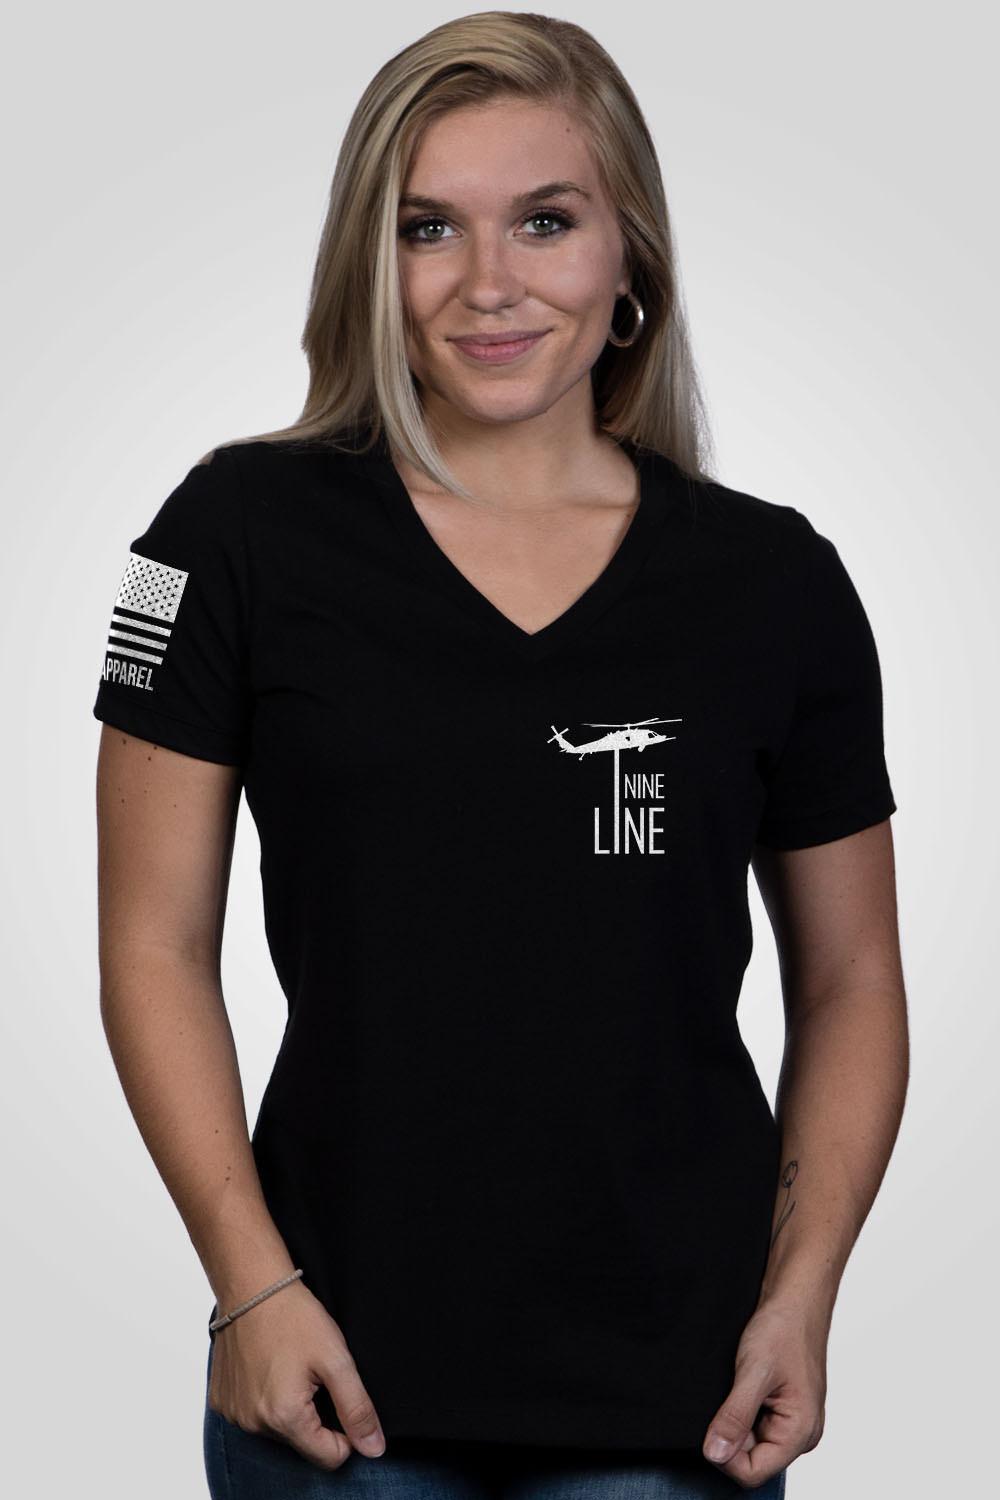 Women's Relaxed Fit V-Neck Shirt - Don't Tread On Me - Nine Line Apparel